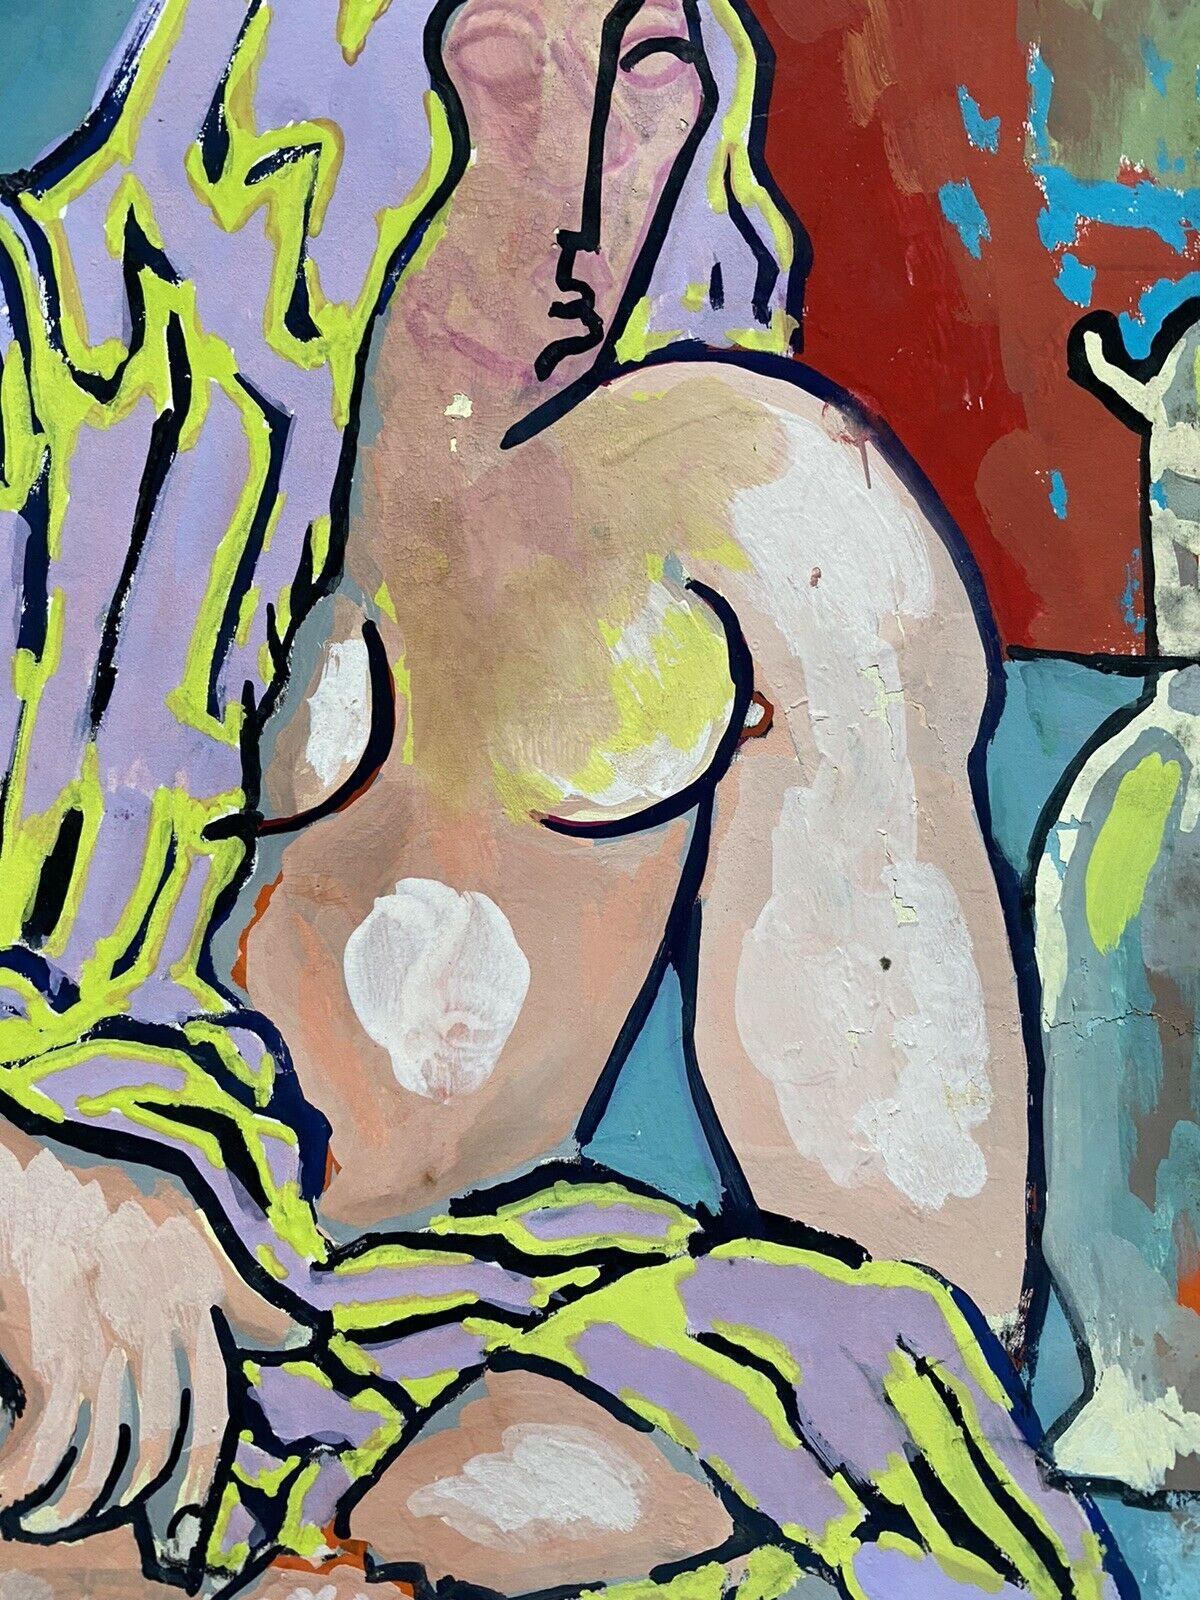 20th CENTURY FRENCH MODERNIST PAINTING - NUDE FIGURE COLORFUL INTERIOR - Painting by Jean Marc